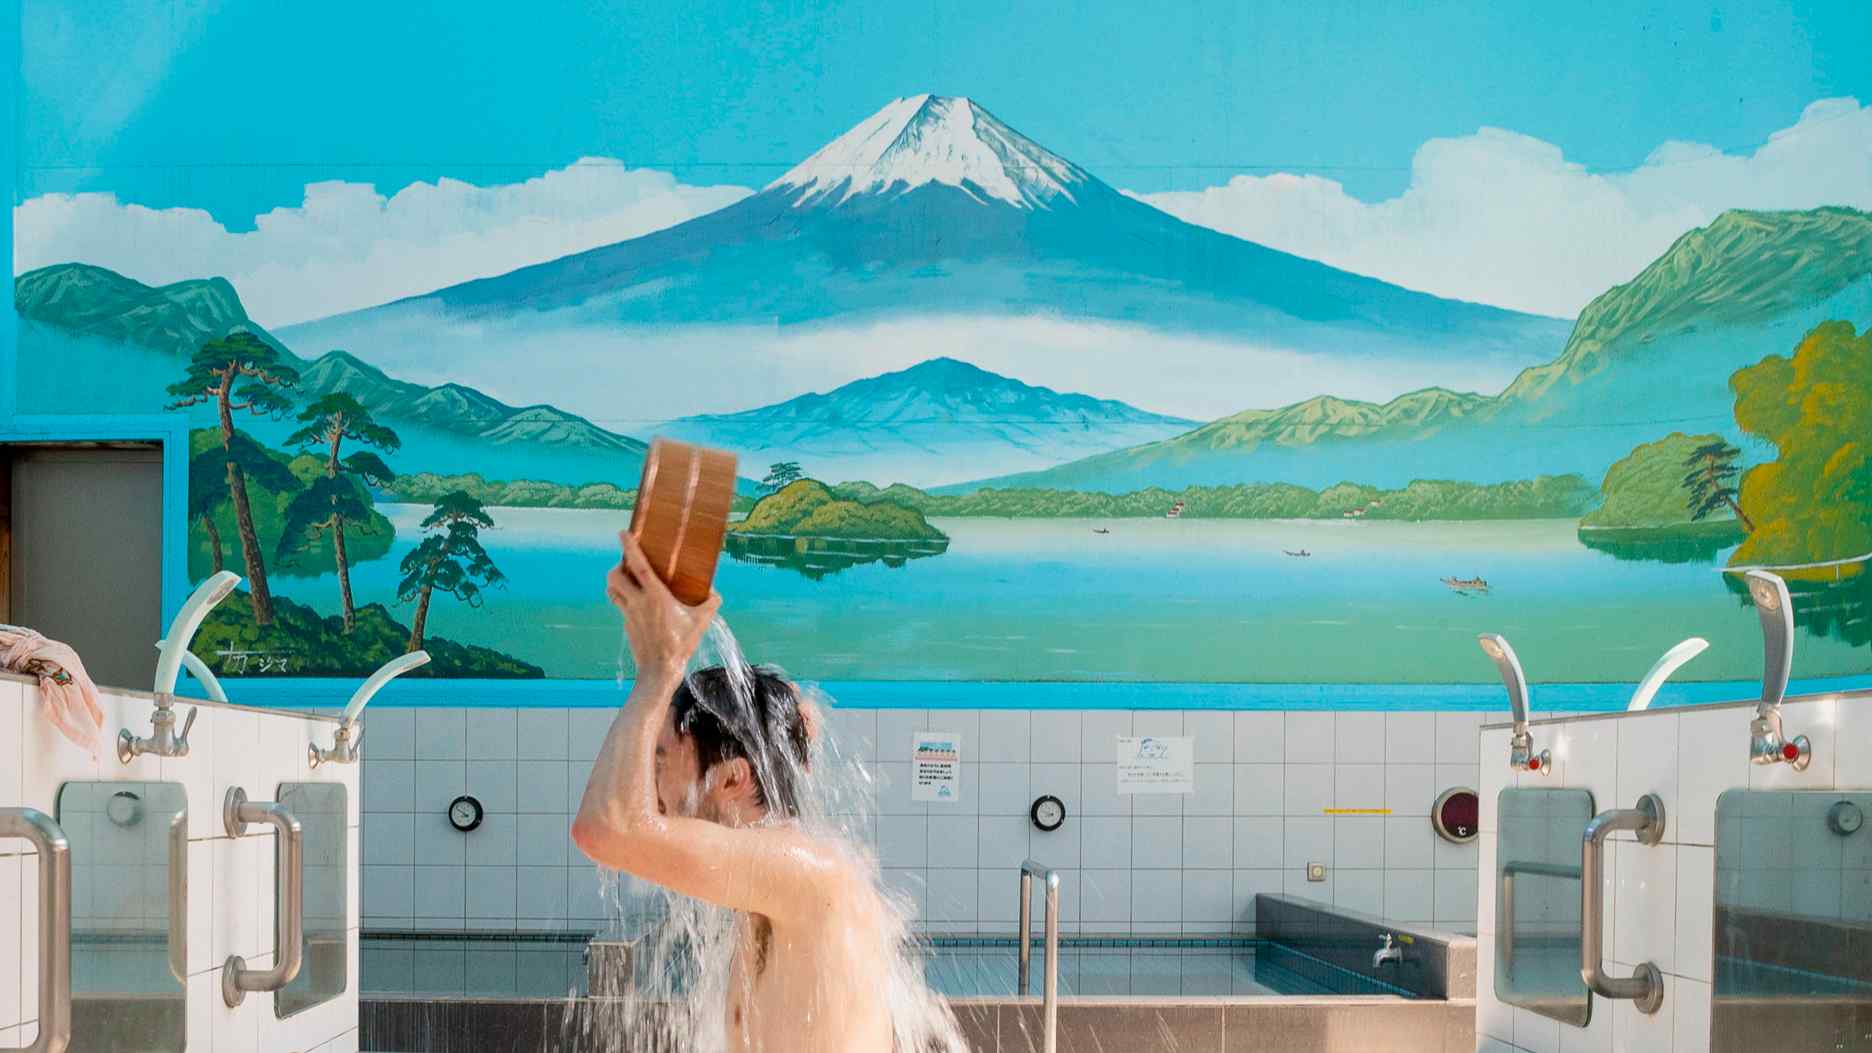 Five of the best sento bathhouse experiences in Tokyo